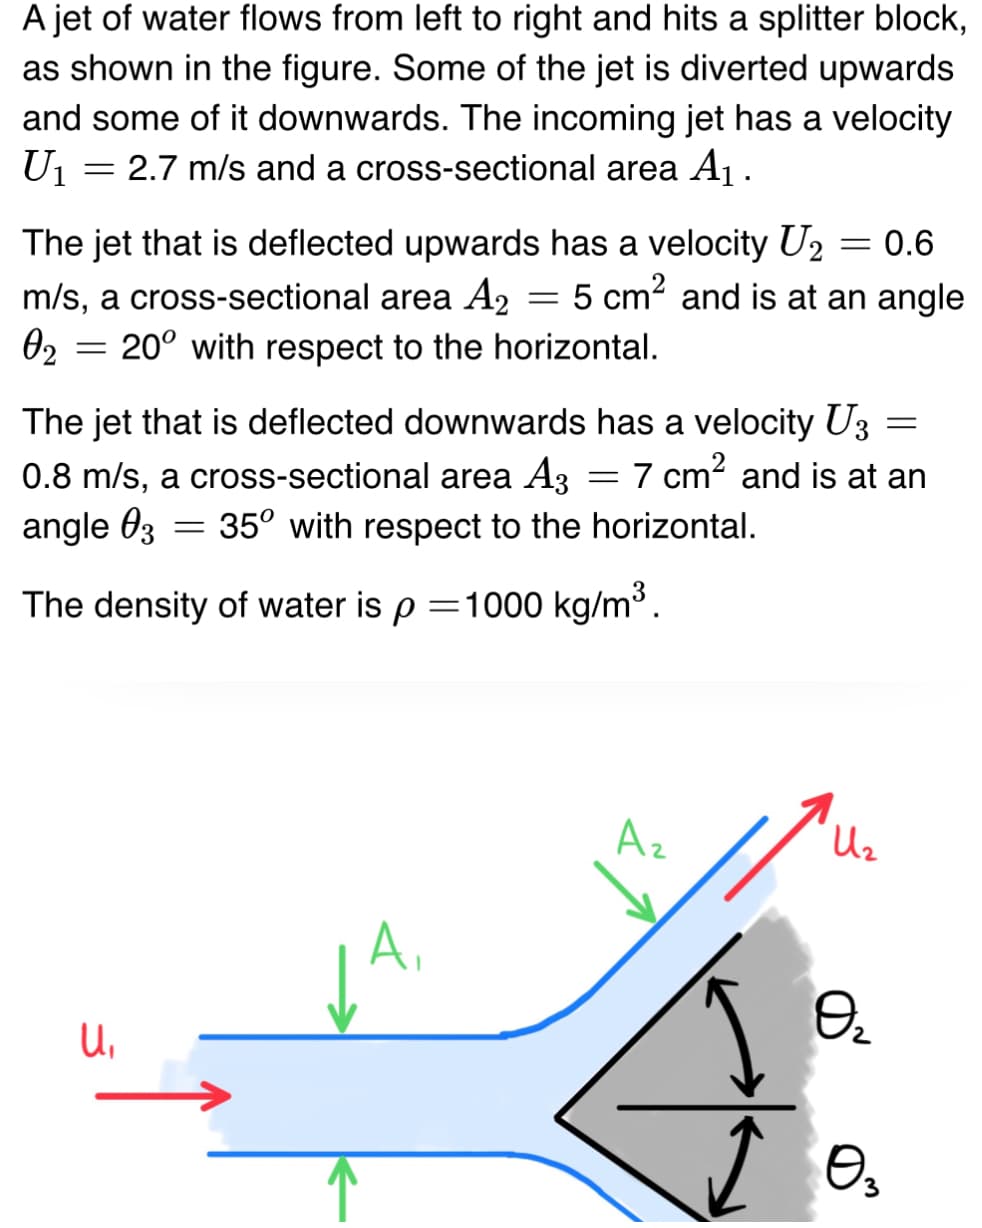 A jet of water flows from left to right and hits a splitter block,
as shown in the figure. Some of the jet is diverted upwards
and some of it downwards. The incoming jet has a velocity
= 2.7 m/s and a cross-sectional area A₁.
U₁
=
The jet that is deflected upwards has a velocity U₂ = 0.6
m/s, a cross-sectional area A2
5 cm² and is at an angle
=
02
20° with respect to the horizontal.
=
The jet that is deflected downwards has a velocity U3
0.8 m/s, a cross-sectional area A3 = 7 cm² and is at an
angle 03 35° with respect to the horizontal.
The density of water is p = 1000 kg/m³.
U₁
=
A₁
A₂
U₂
Өг
3
=